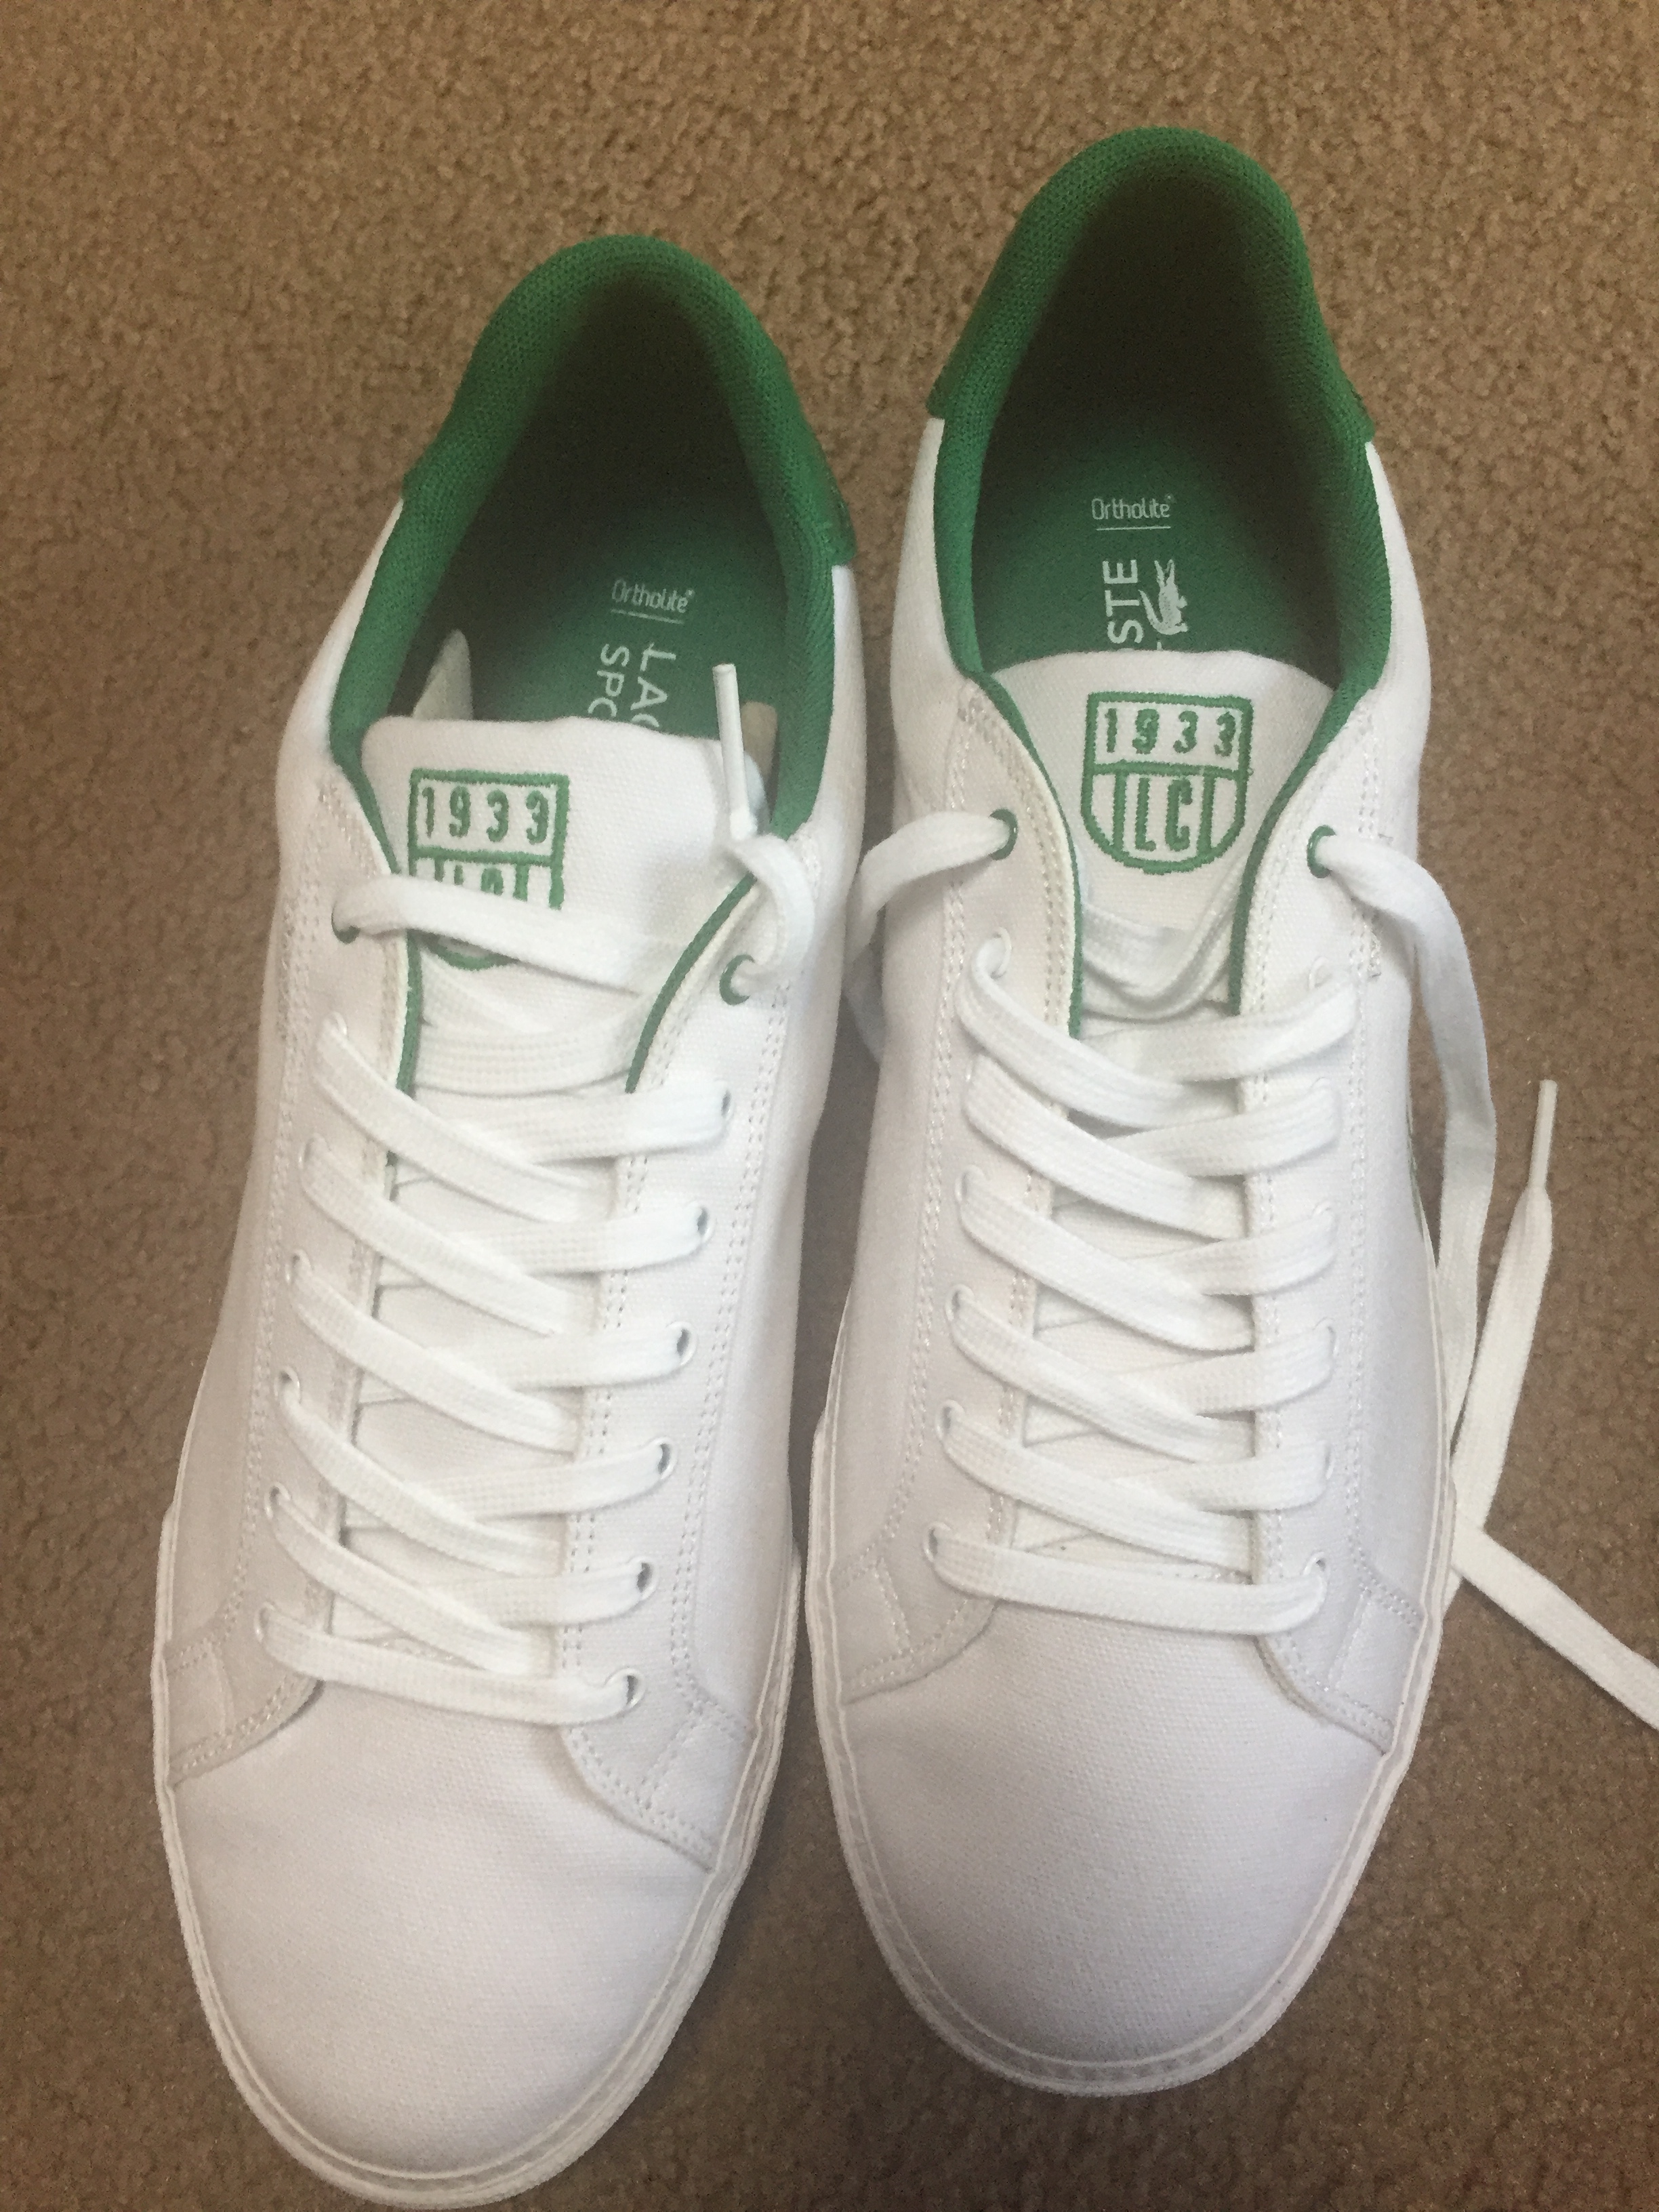 fake lacoste sneakers